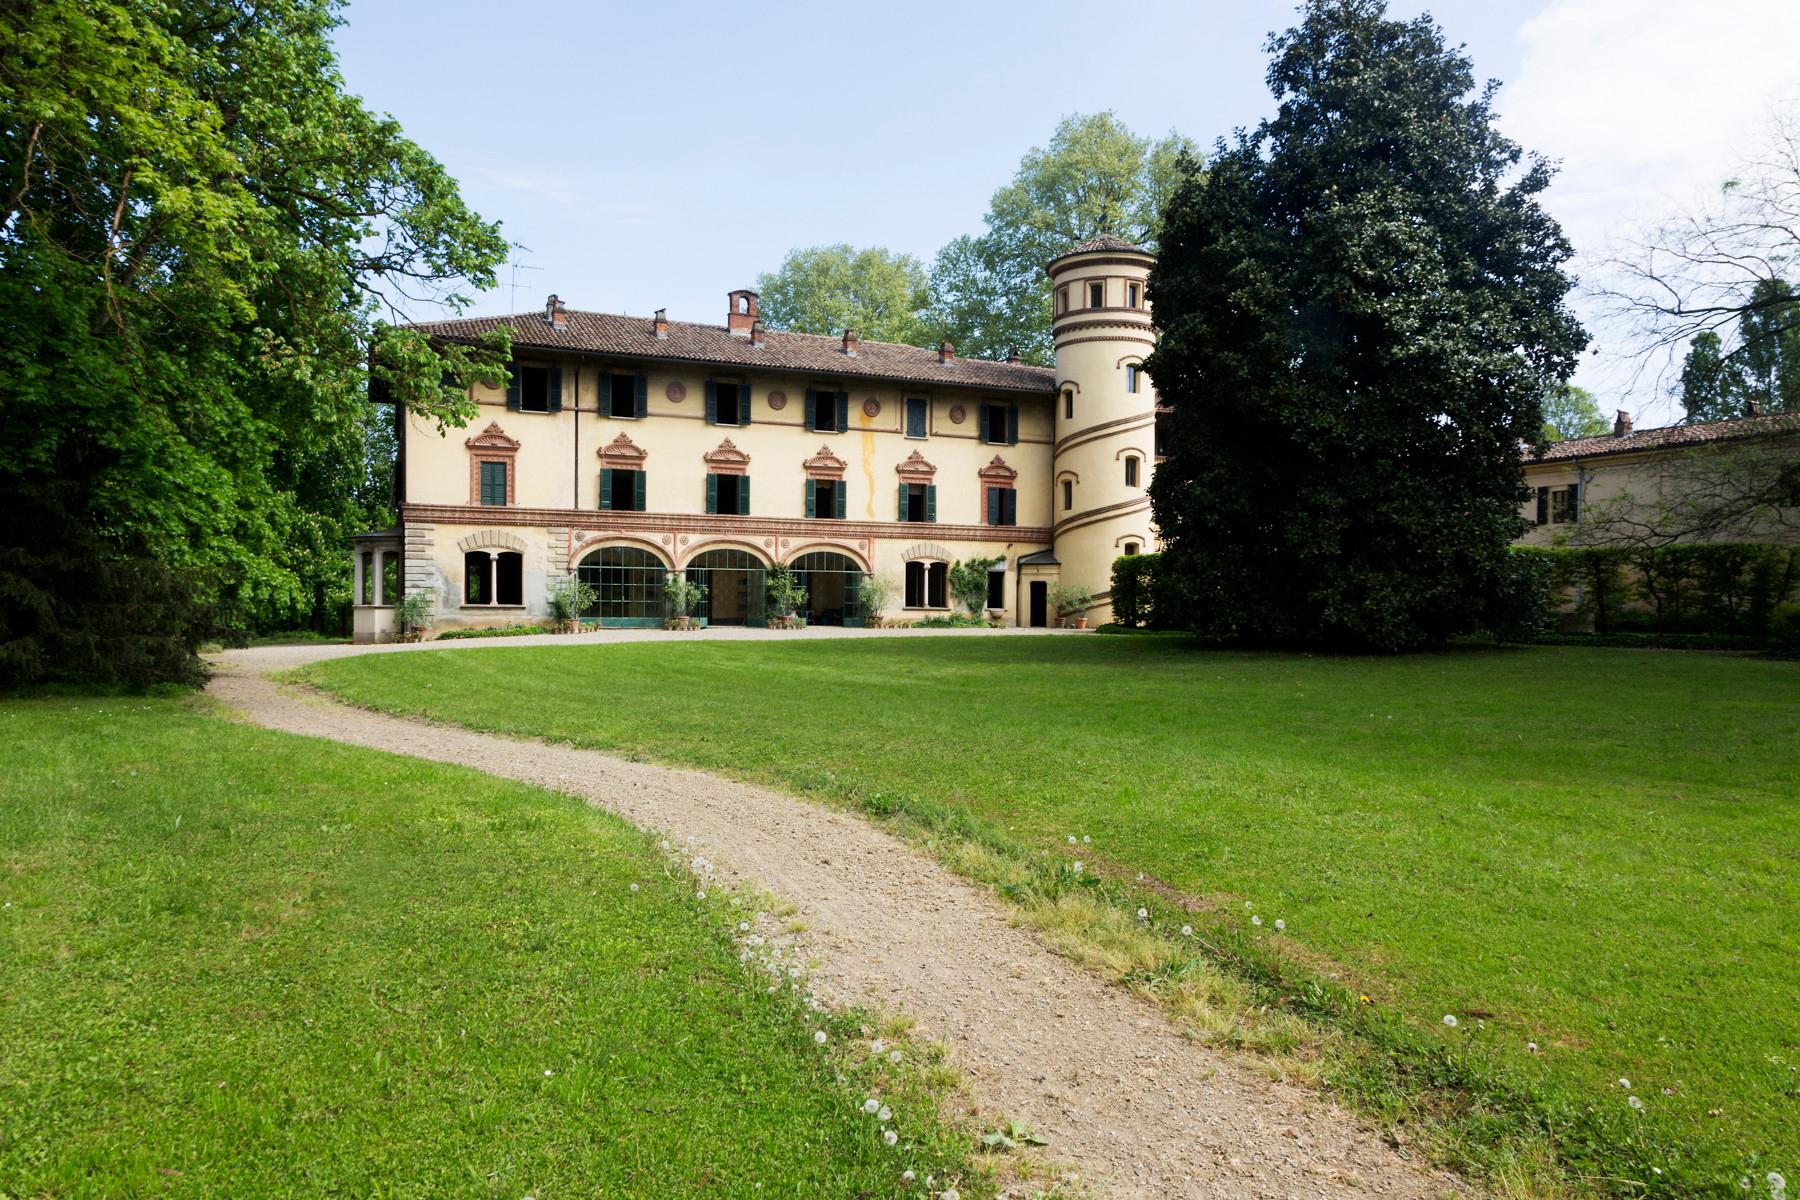 Historical property surrounded by a majestic park - 2